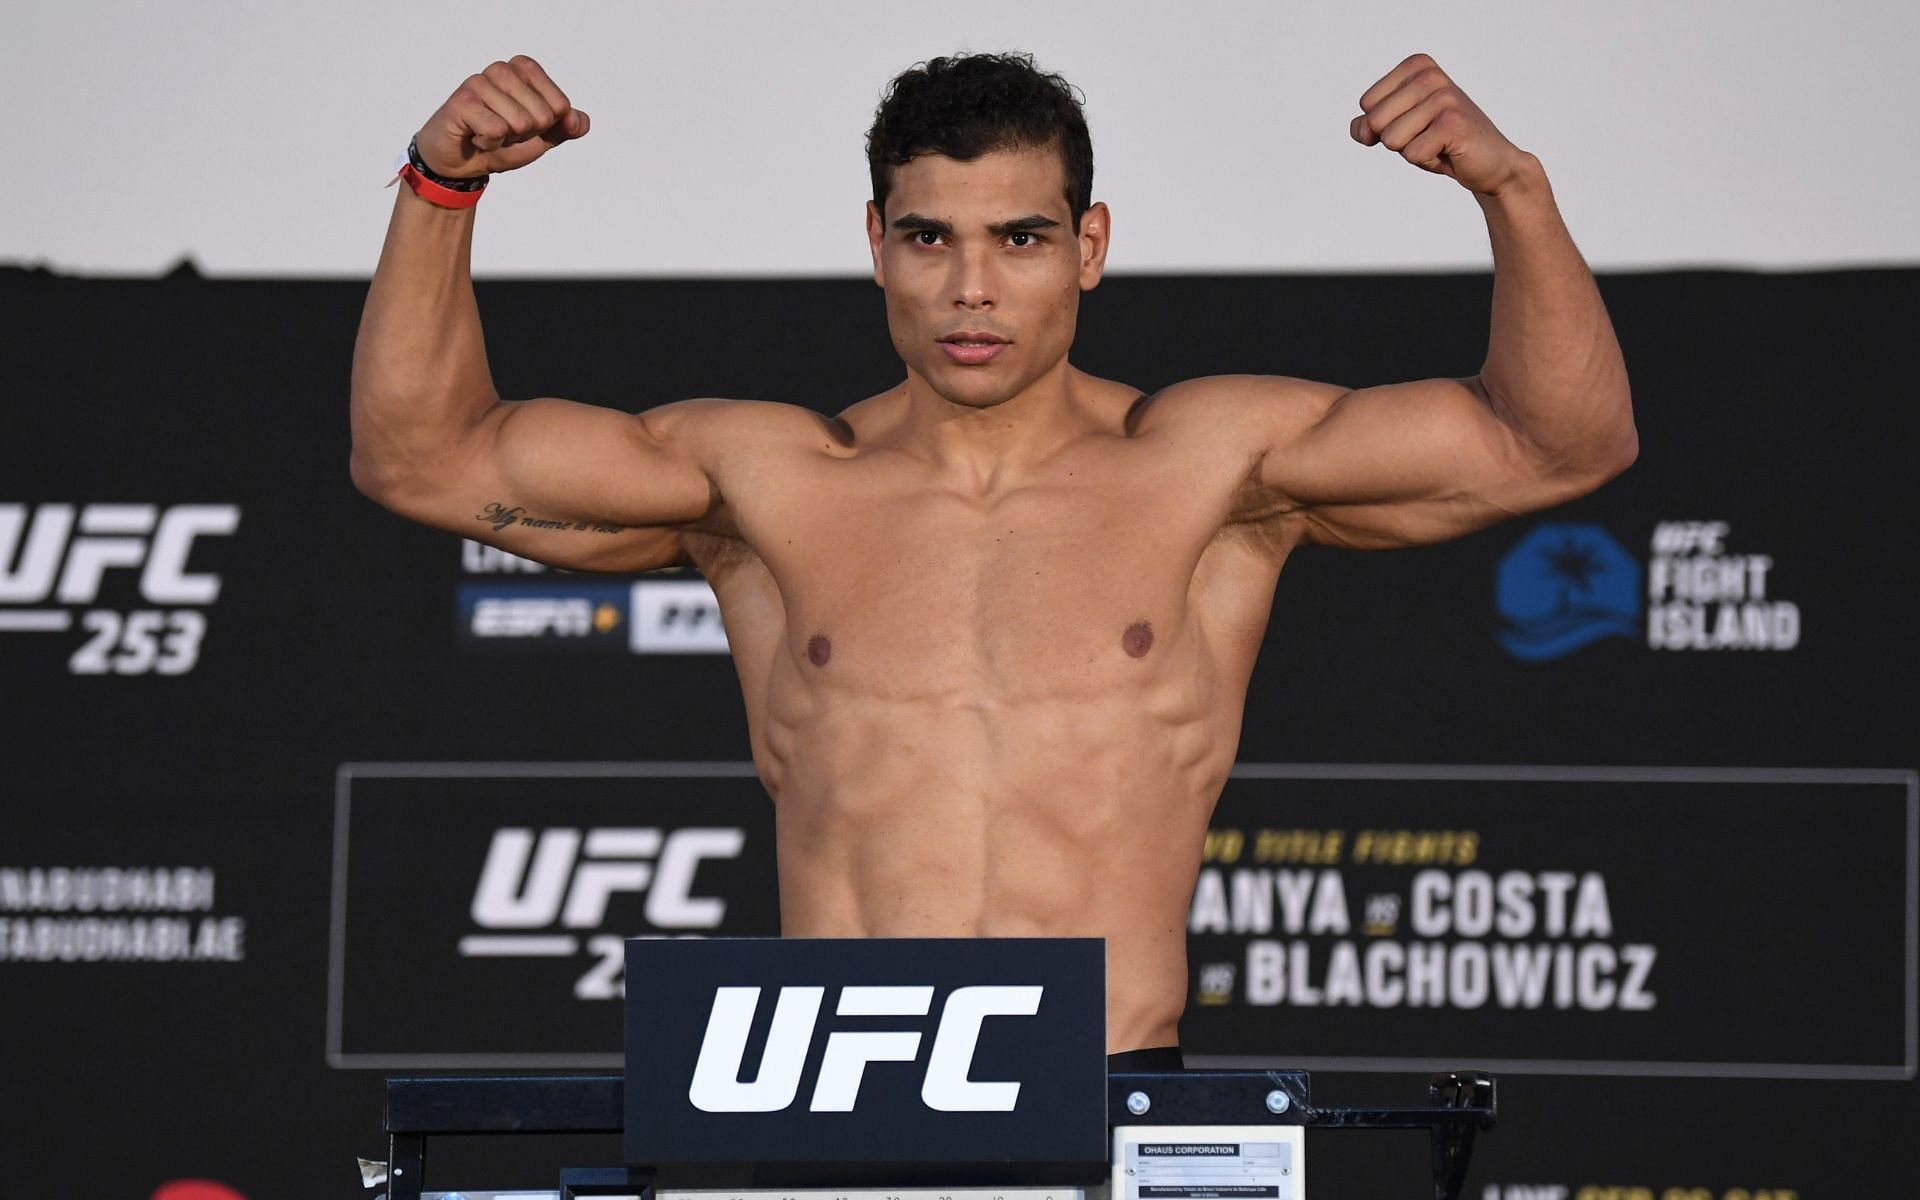 Paulo Costa's Blue Hair: A Reflection of His Brazilian Heritage - wide 3